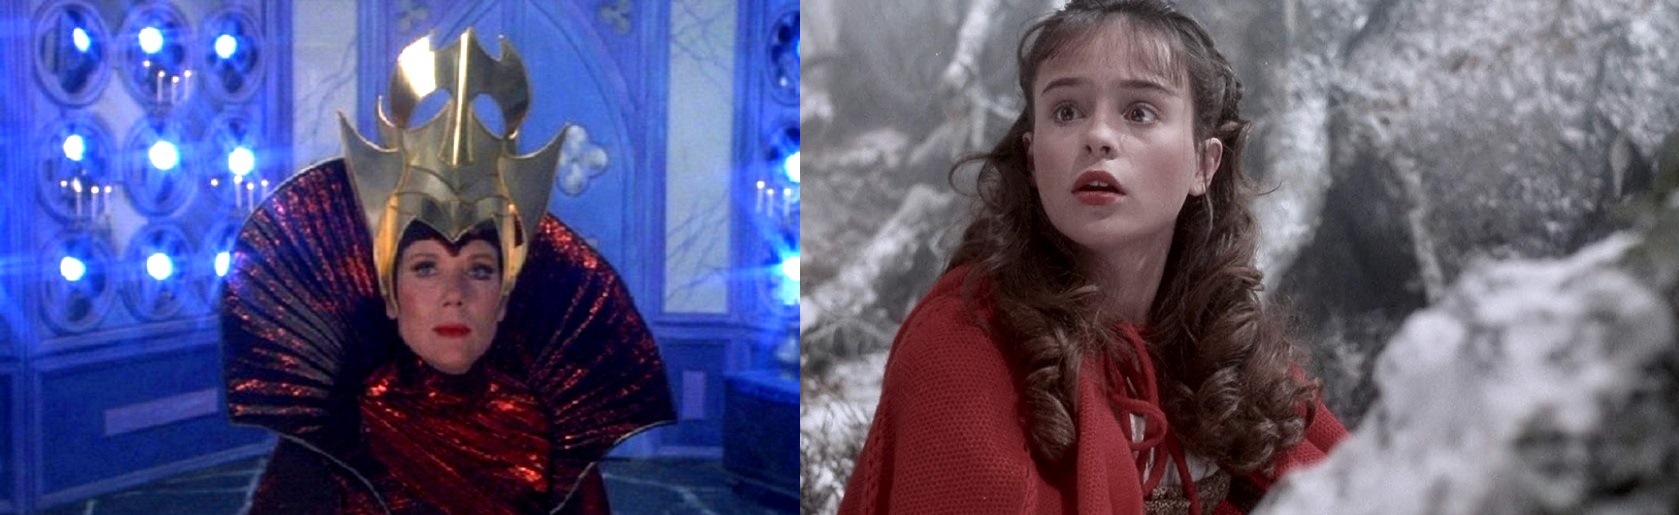 The Evil Queen (Diana Rigg) and Snow White (Sarah Patterson) in Snow White (1987)